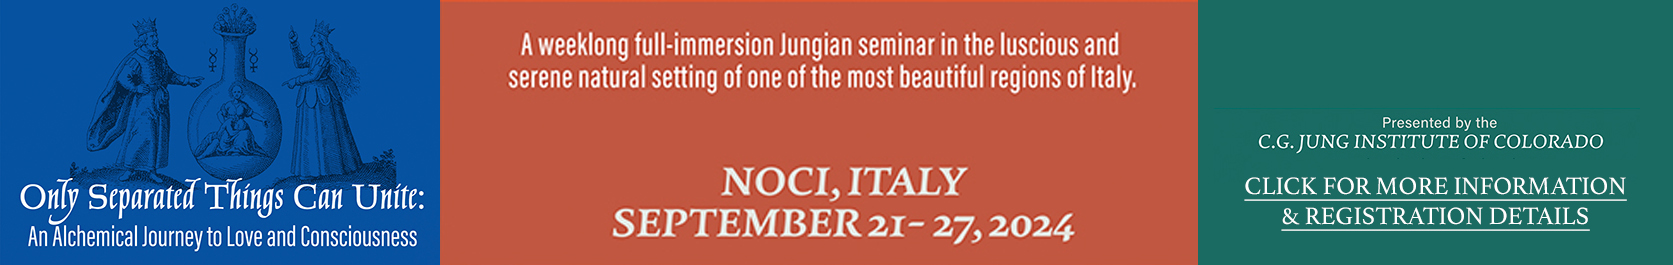 ONLY SEPARATED THINGS CAN UNITE: An Alchemical Journey to Love and Consciousness Italy Seminar